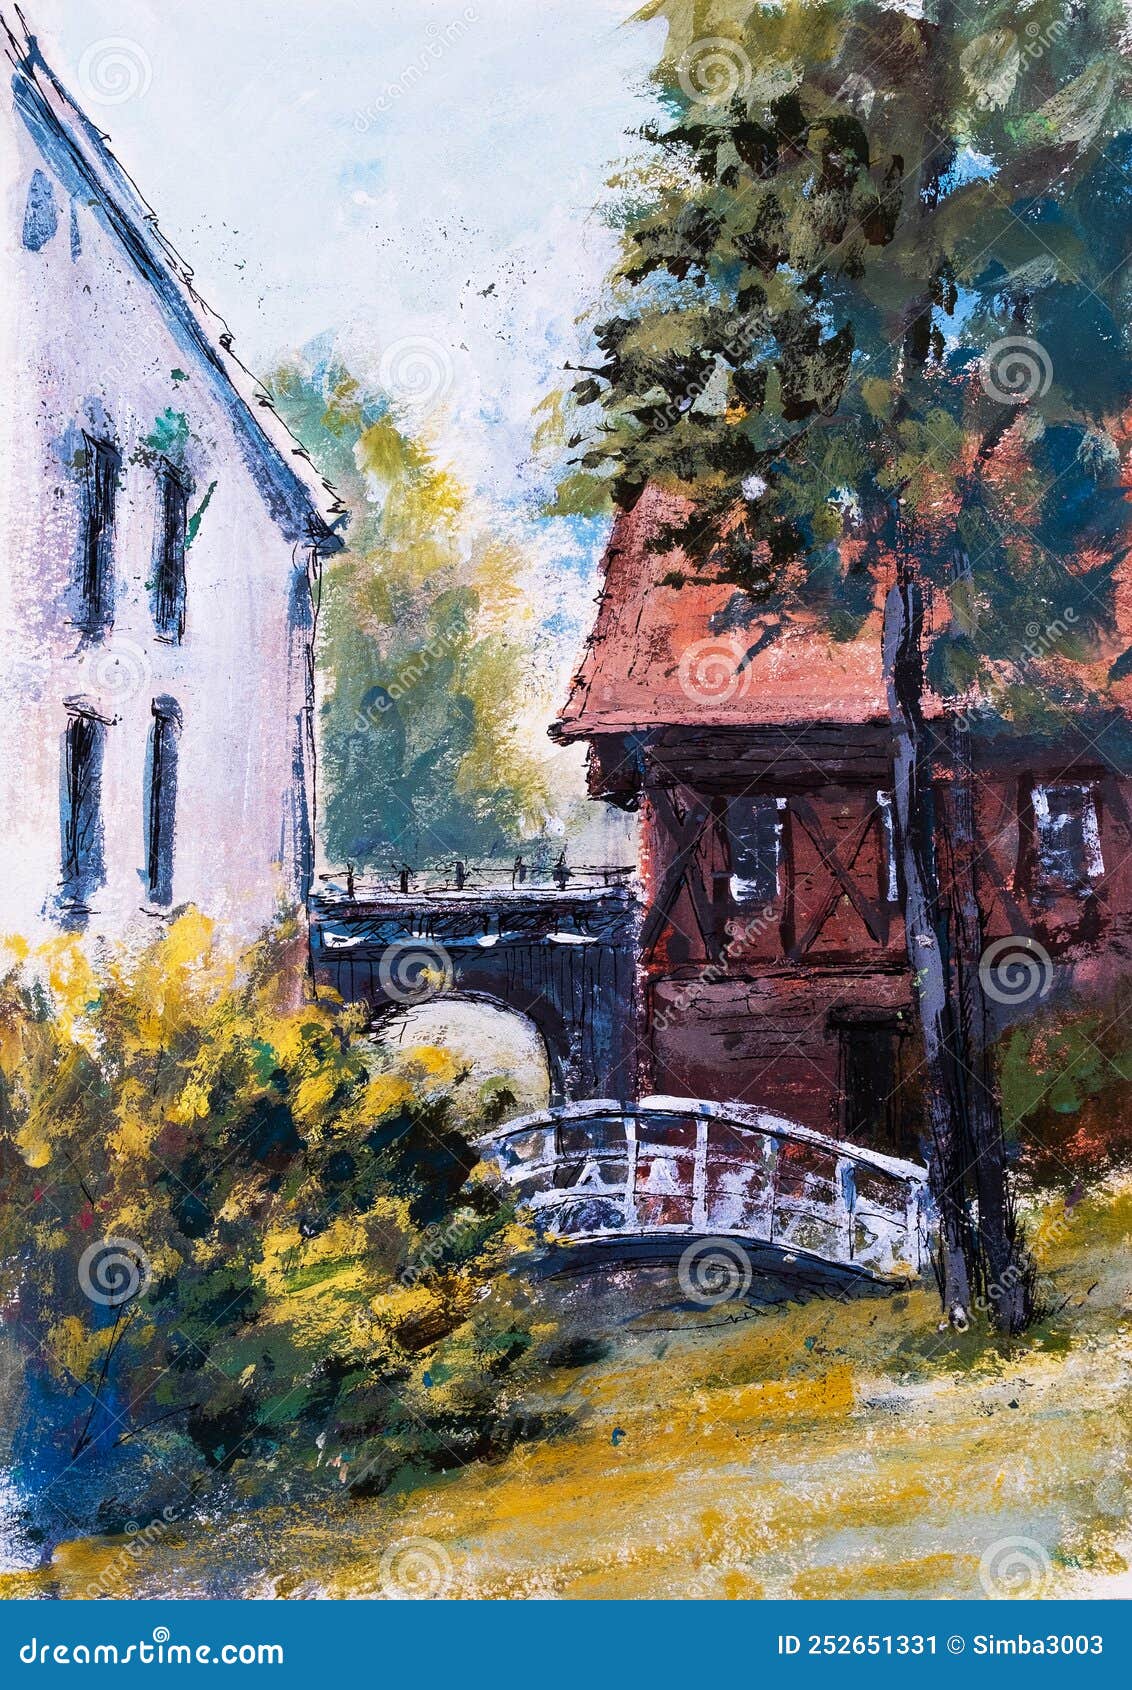 tempera sketch of old house